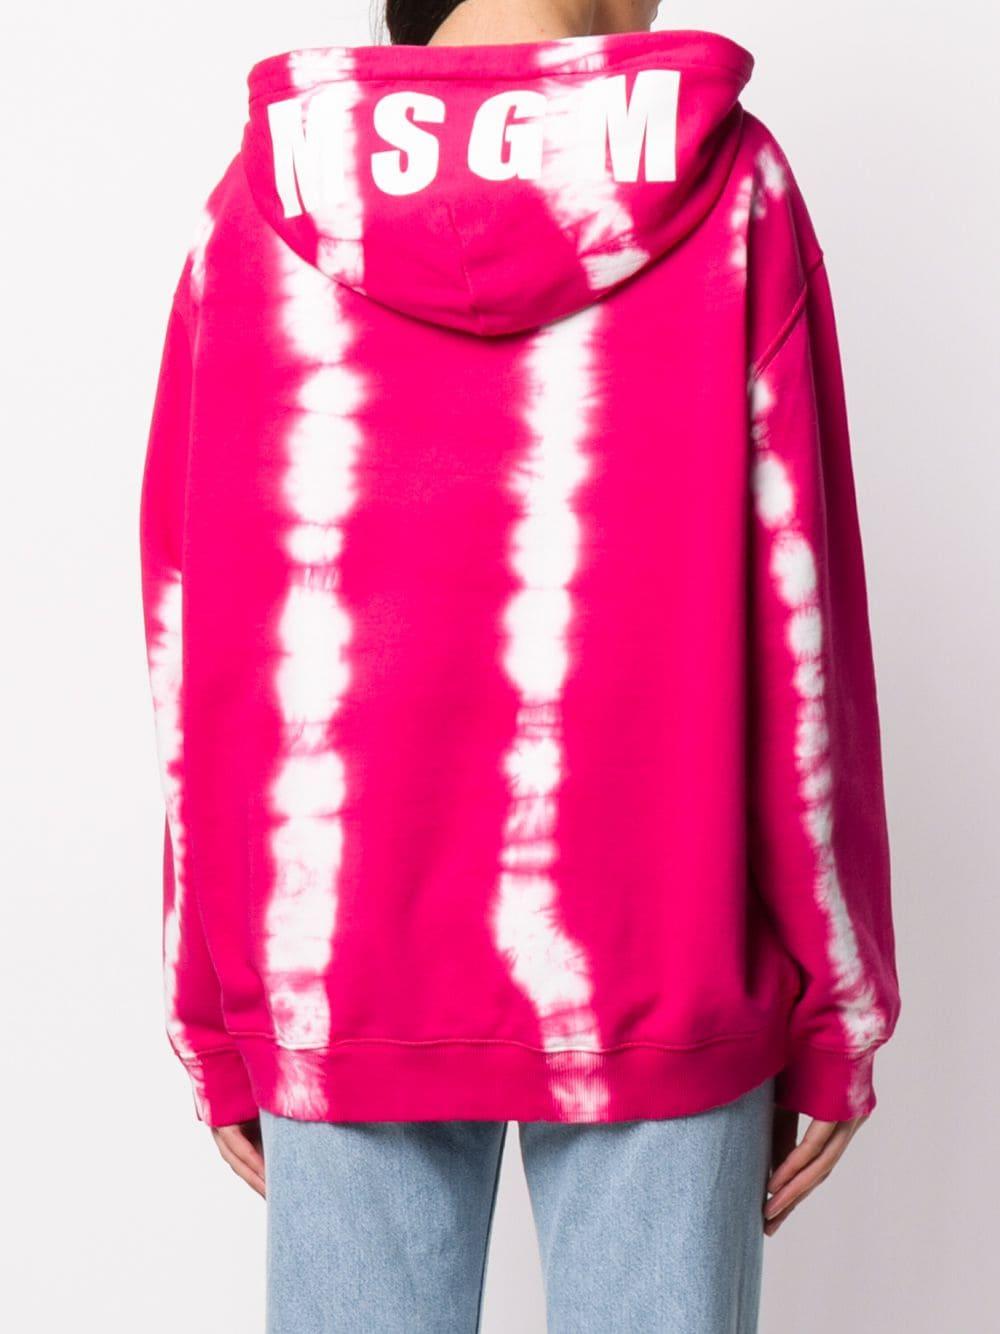 MSGM Tie-dye Cotton Hoodie in Pink - Save 40% - Lyst